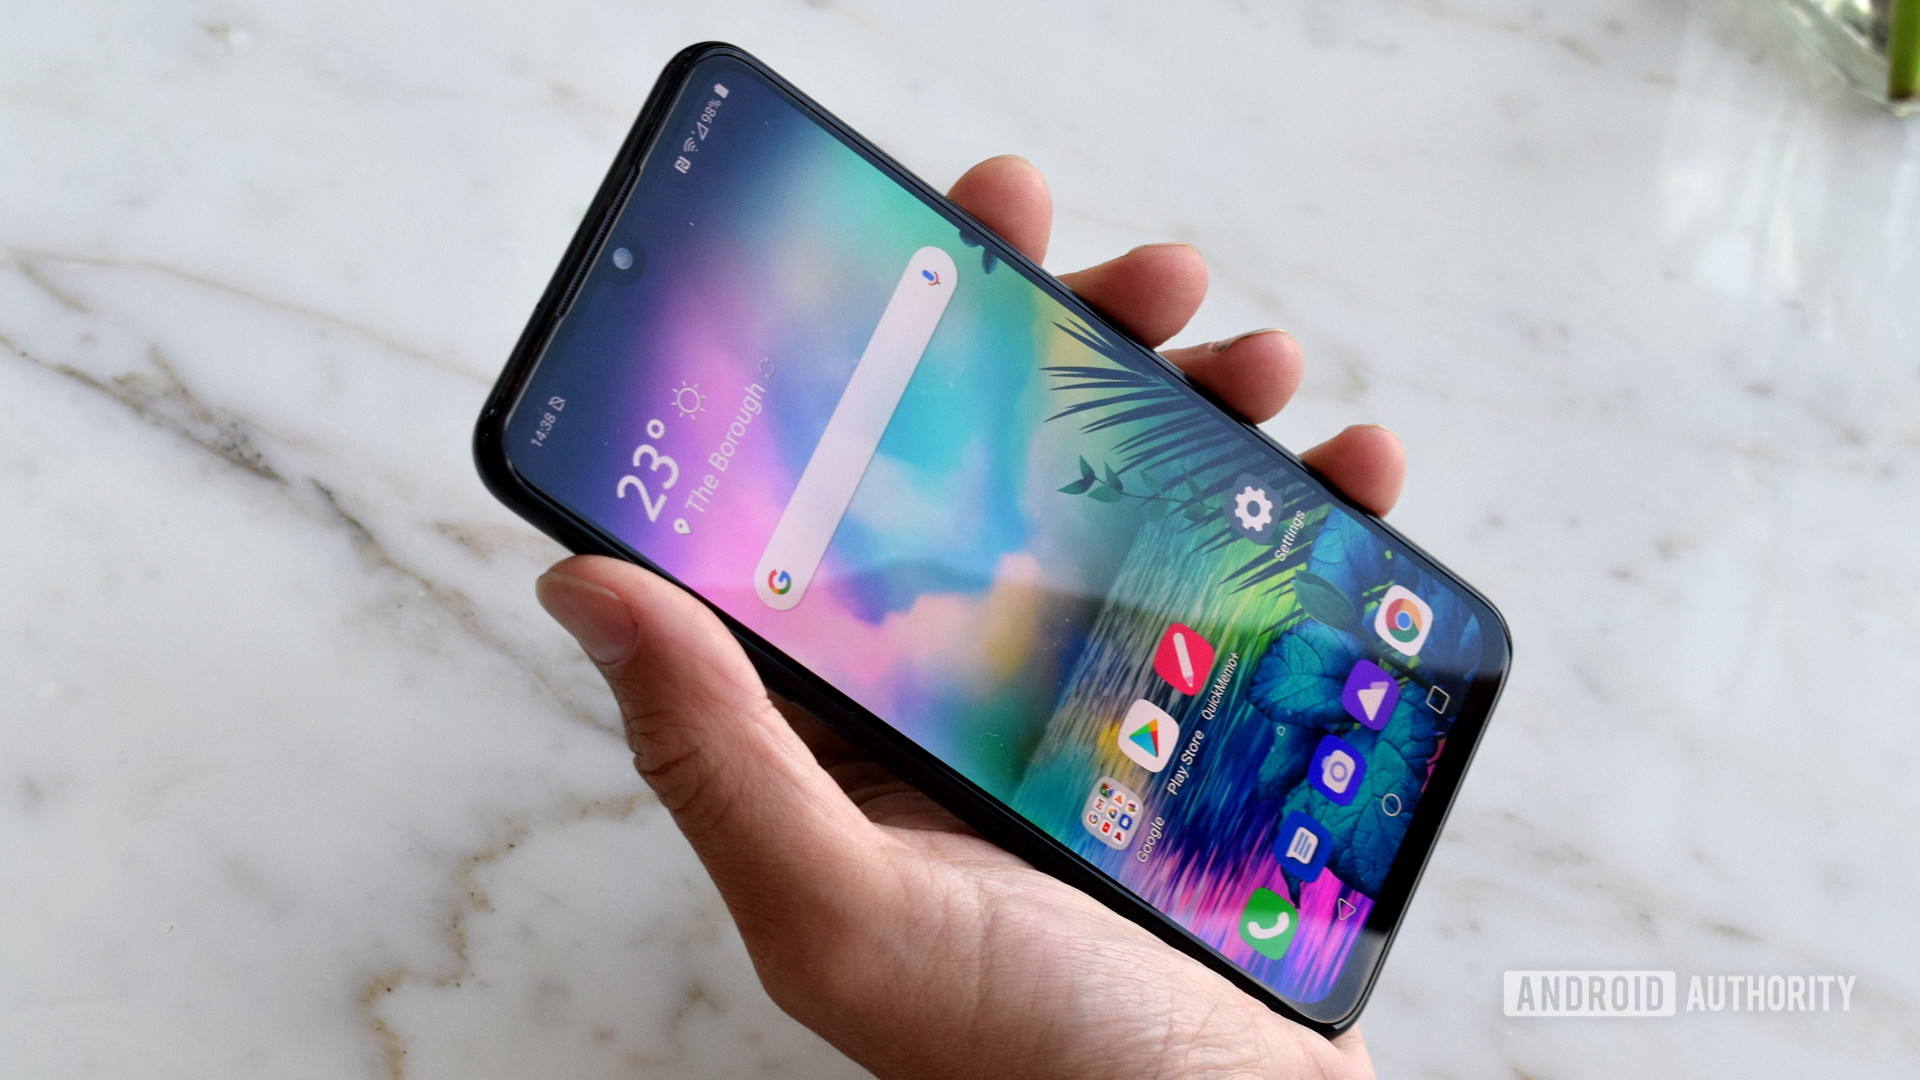 The LG G8X ThinQ is one of the most underrated smartphones of 2019.